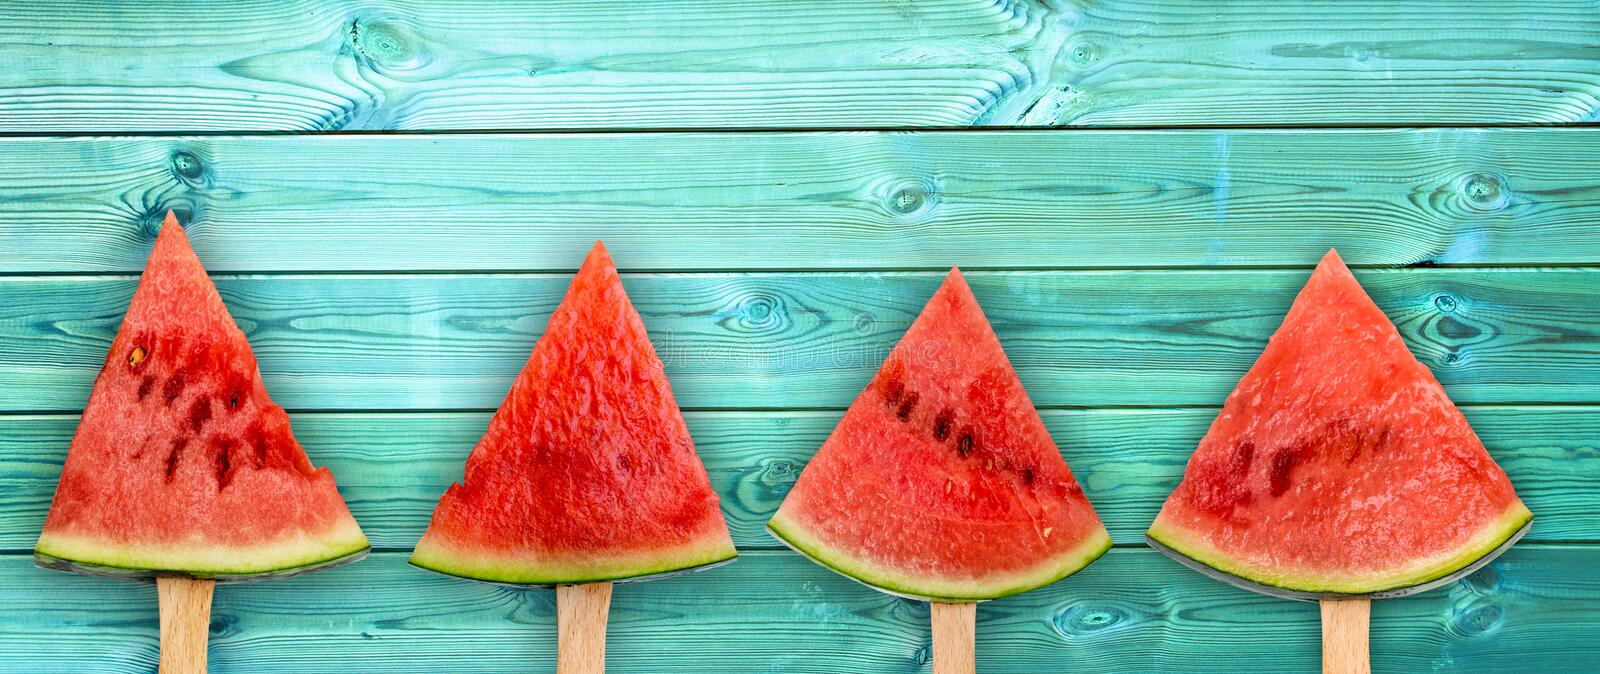 A SLICE OF WATERMELON A DAY, KEEPS THE HEART DOCTOR AWAY